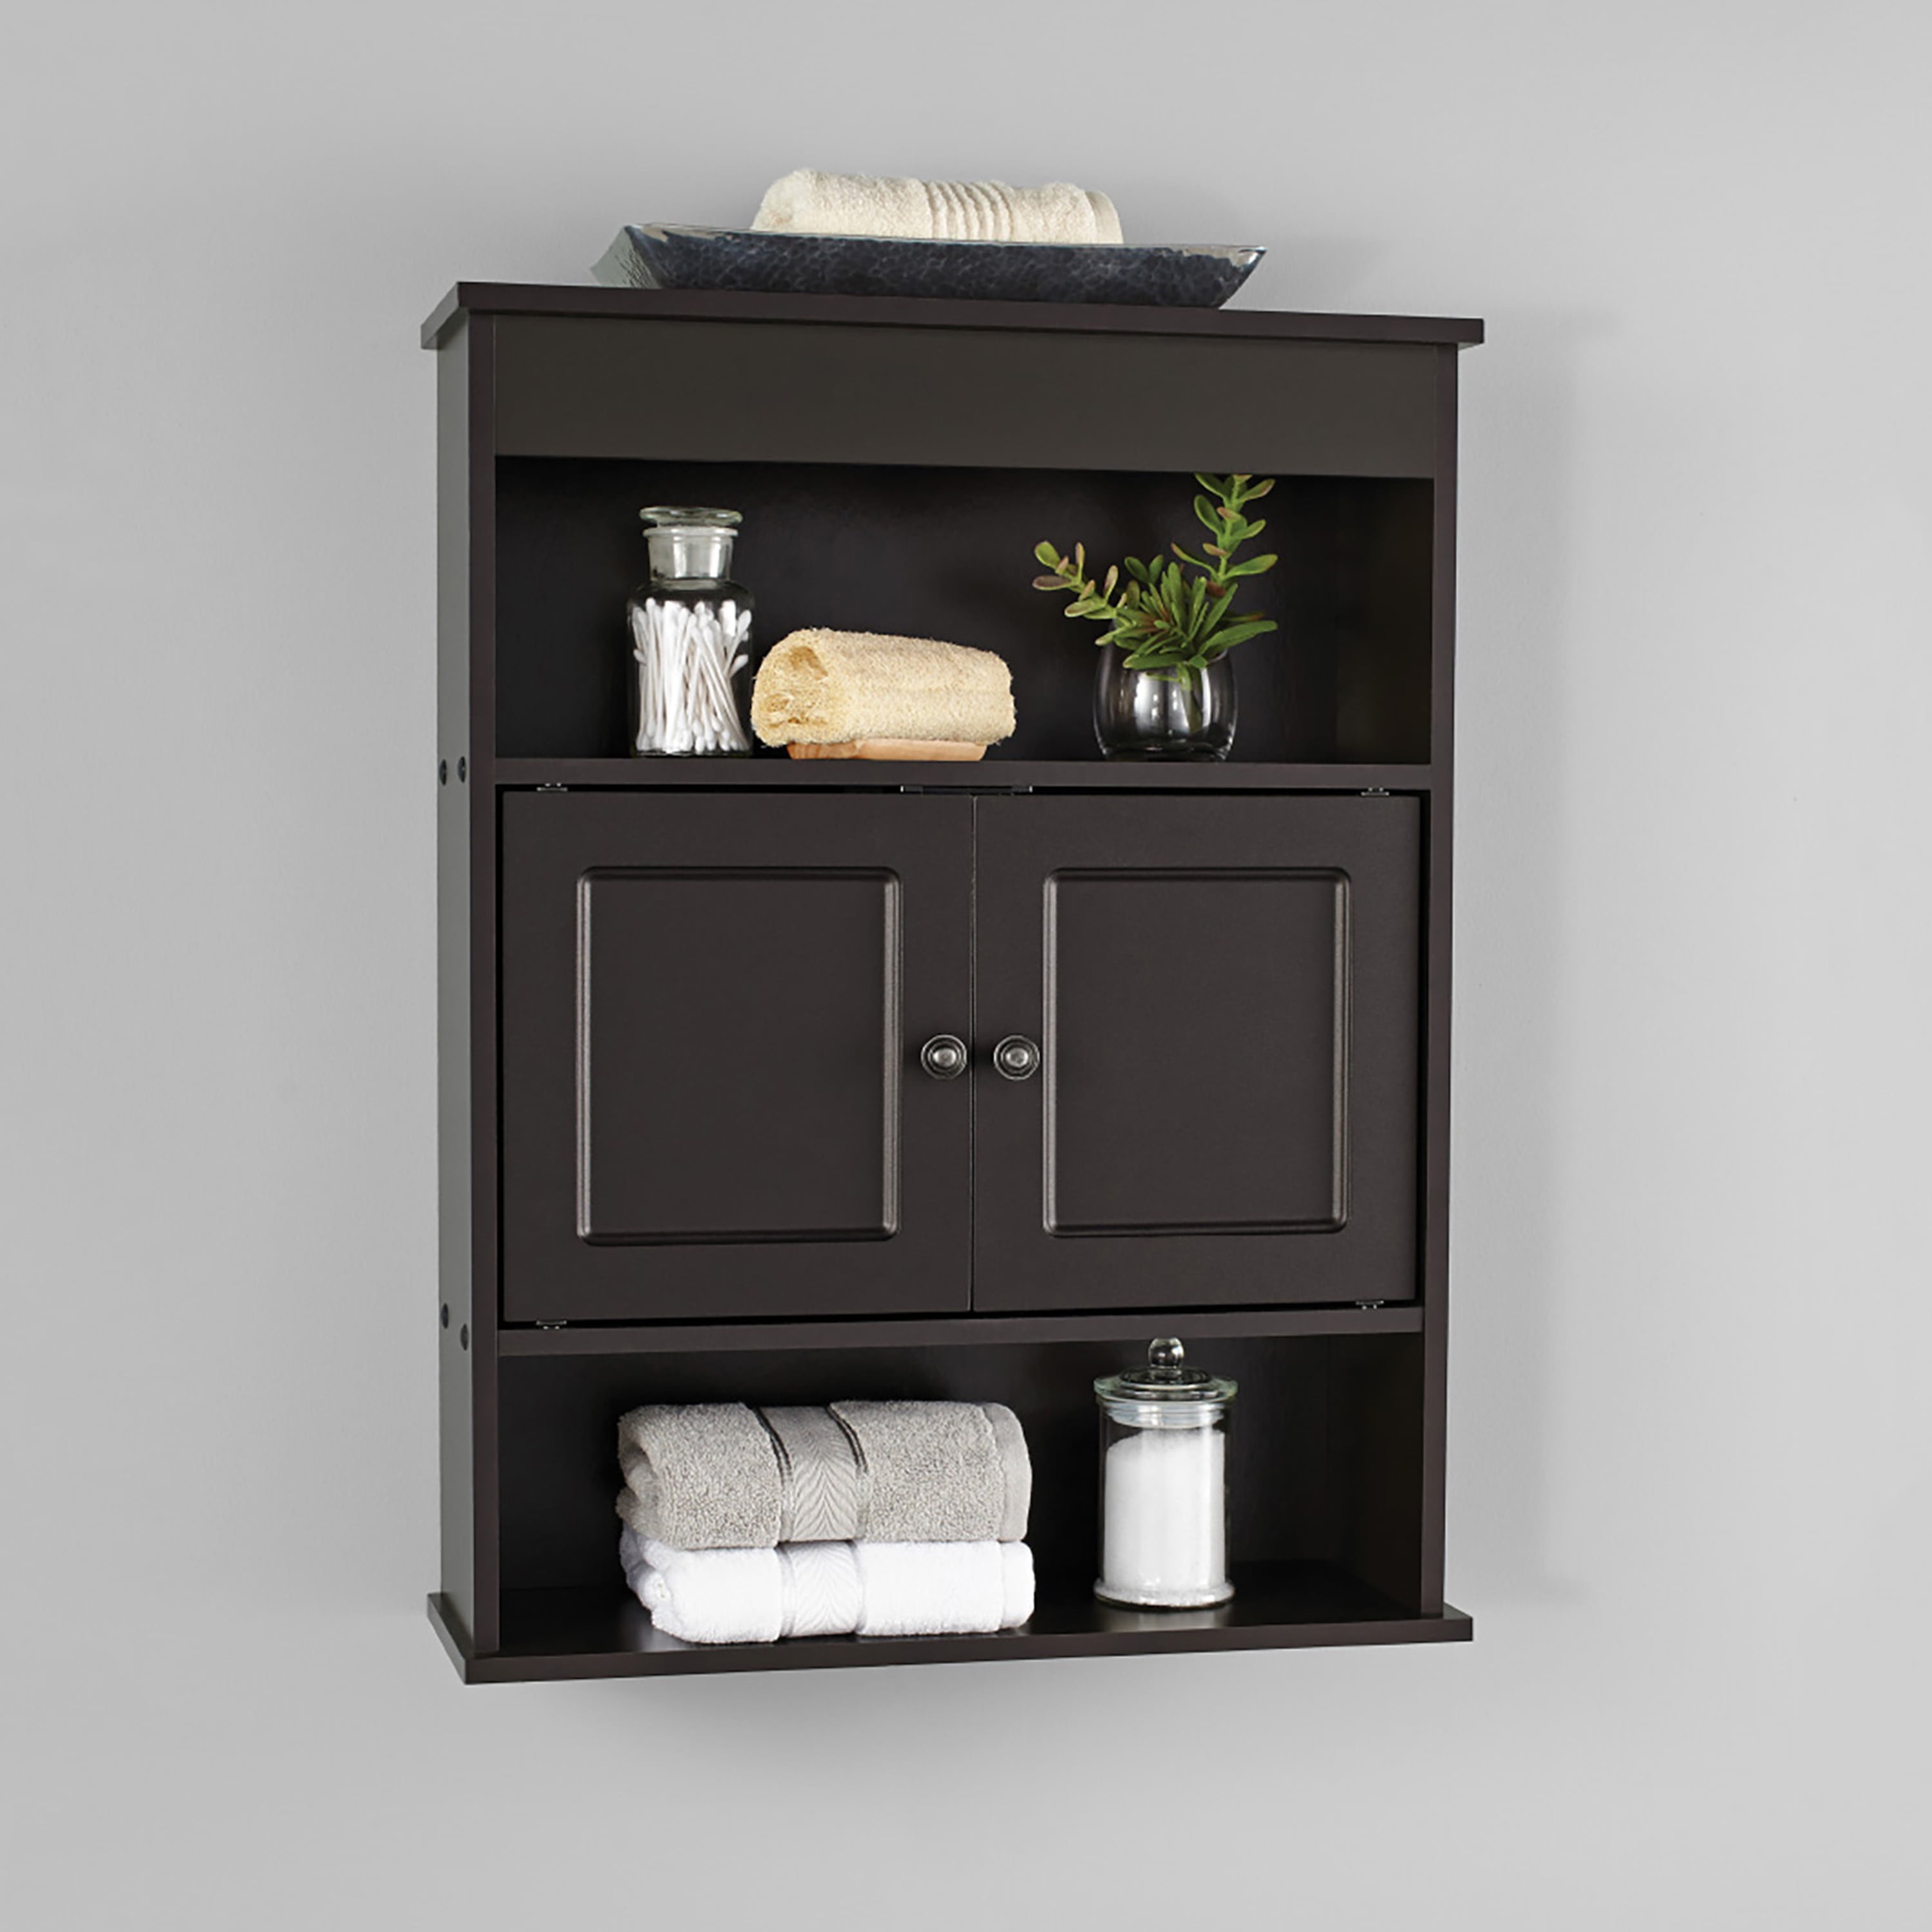 2 Drawer Storage Drawer For Bedroom Bathroom Black Be Inspired By This Rang GIFT 